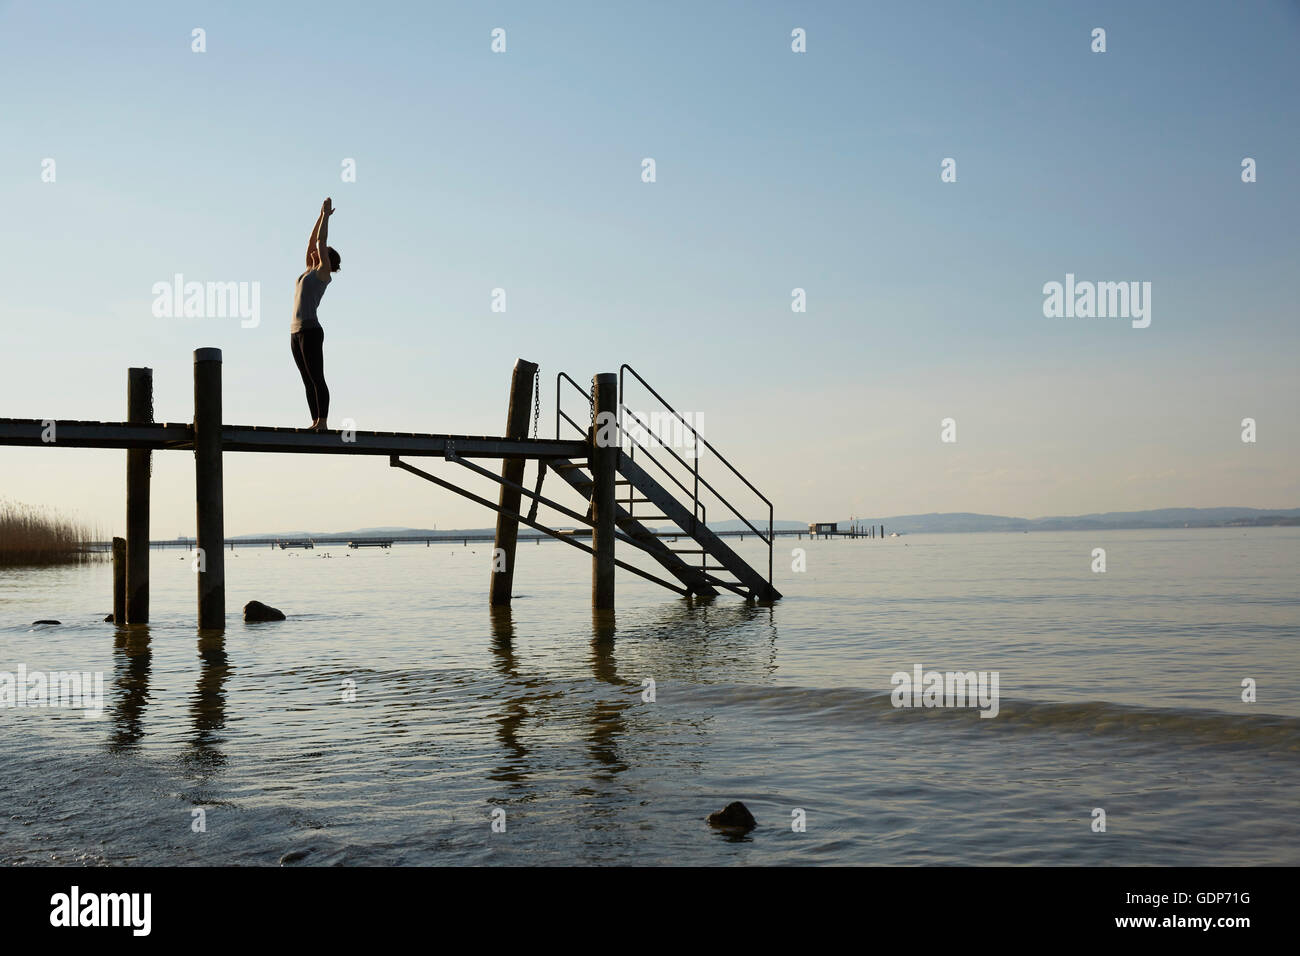 Silhouette of woman on pier arms raised in yoga position Stock Photo